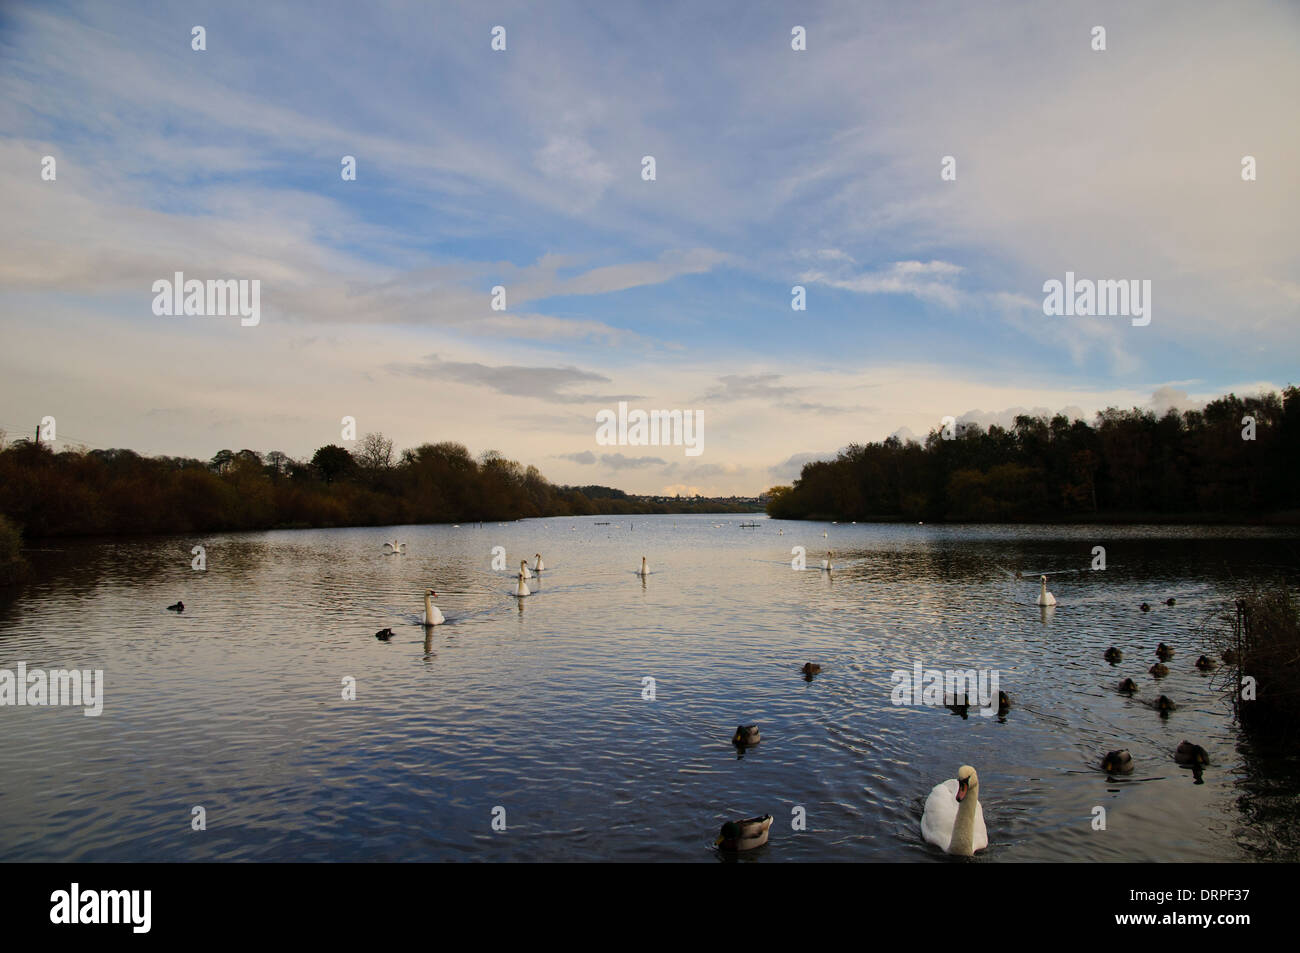 A view of Main Bay at RSPB Fairburn Ings with mallards (Anas platyrhynchos) and mute swans (Cygnus olor). Stock Photo